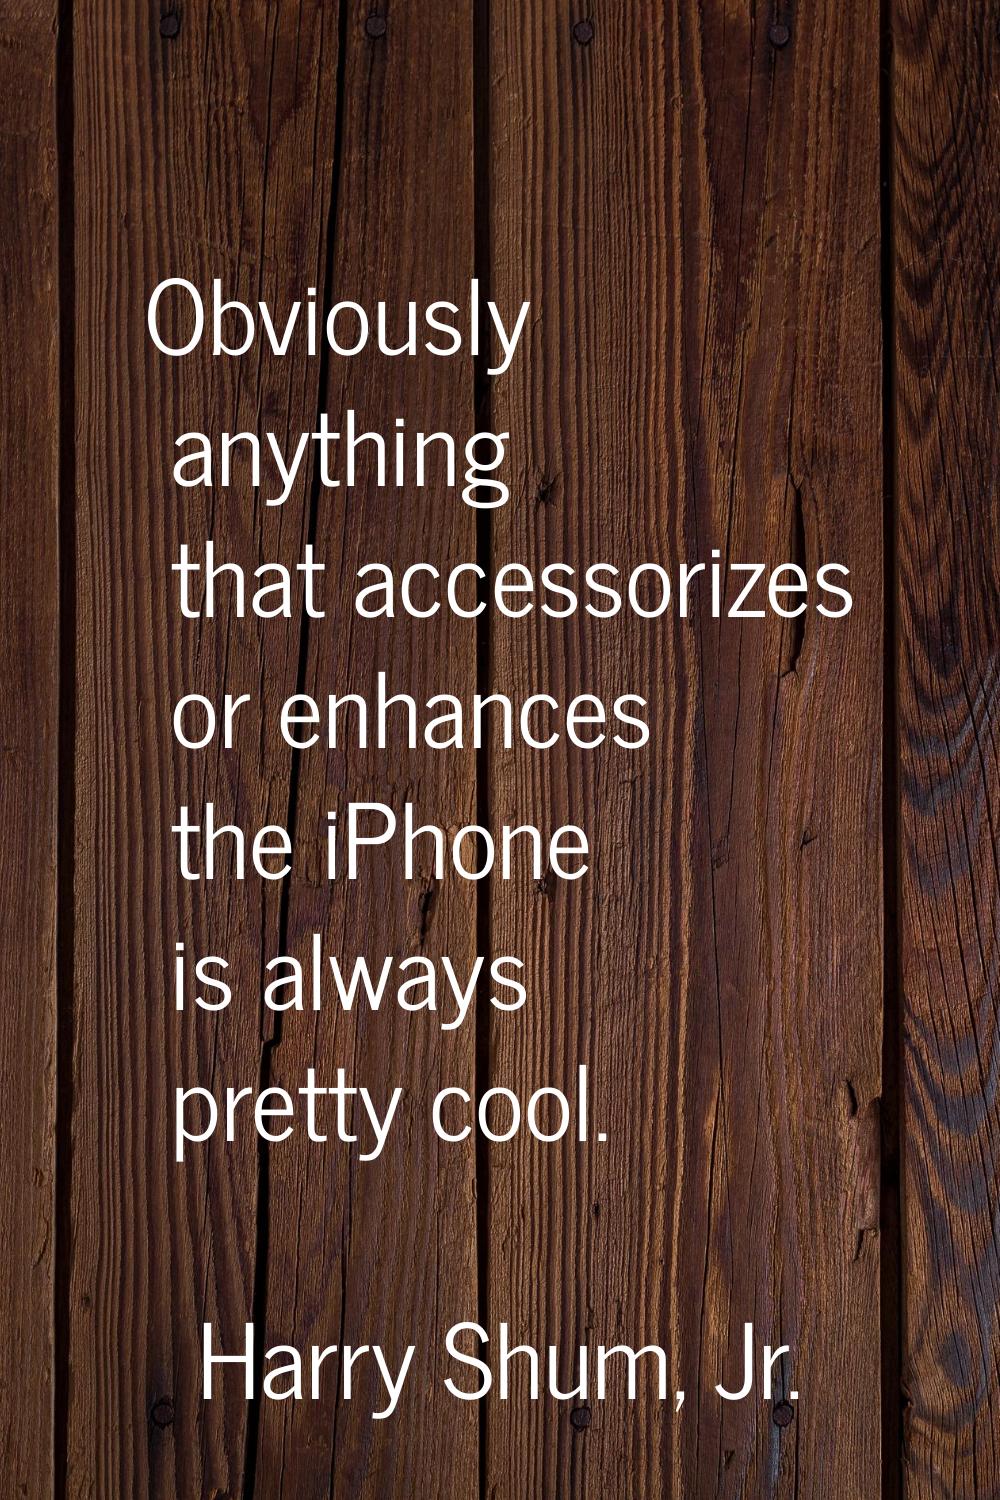 Obviously anything that accessorizes or enhances the iPhone is always pretty cool.